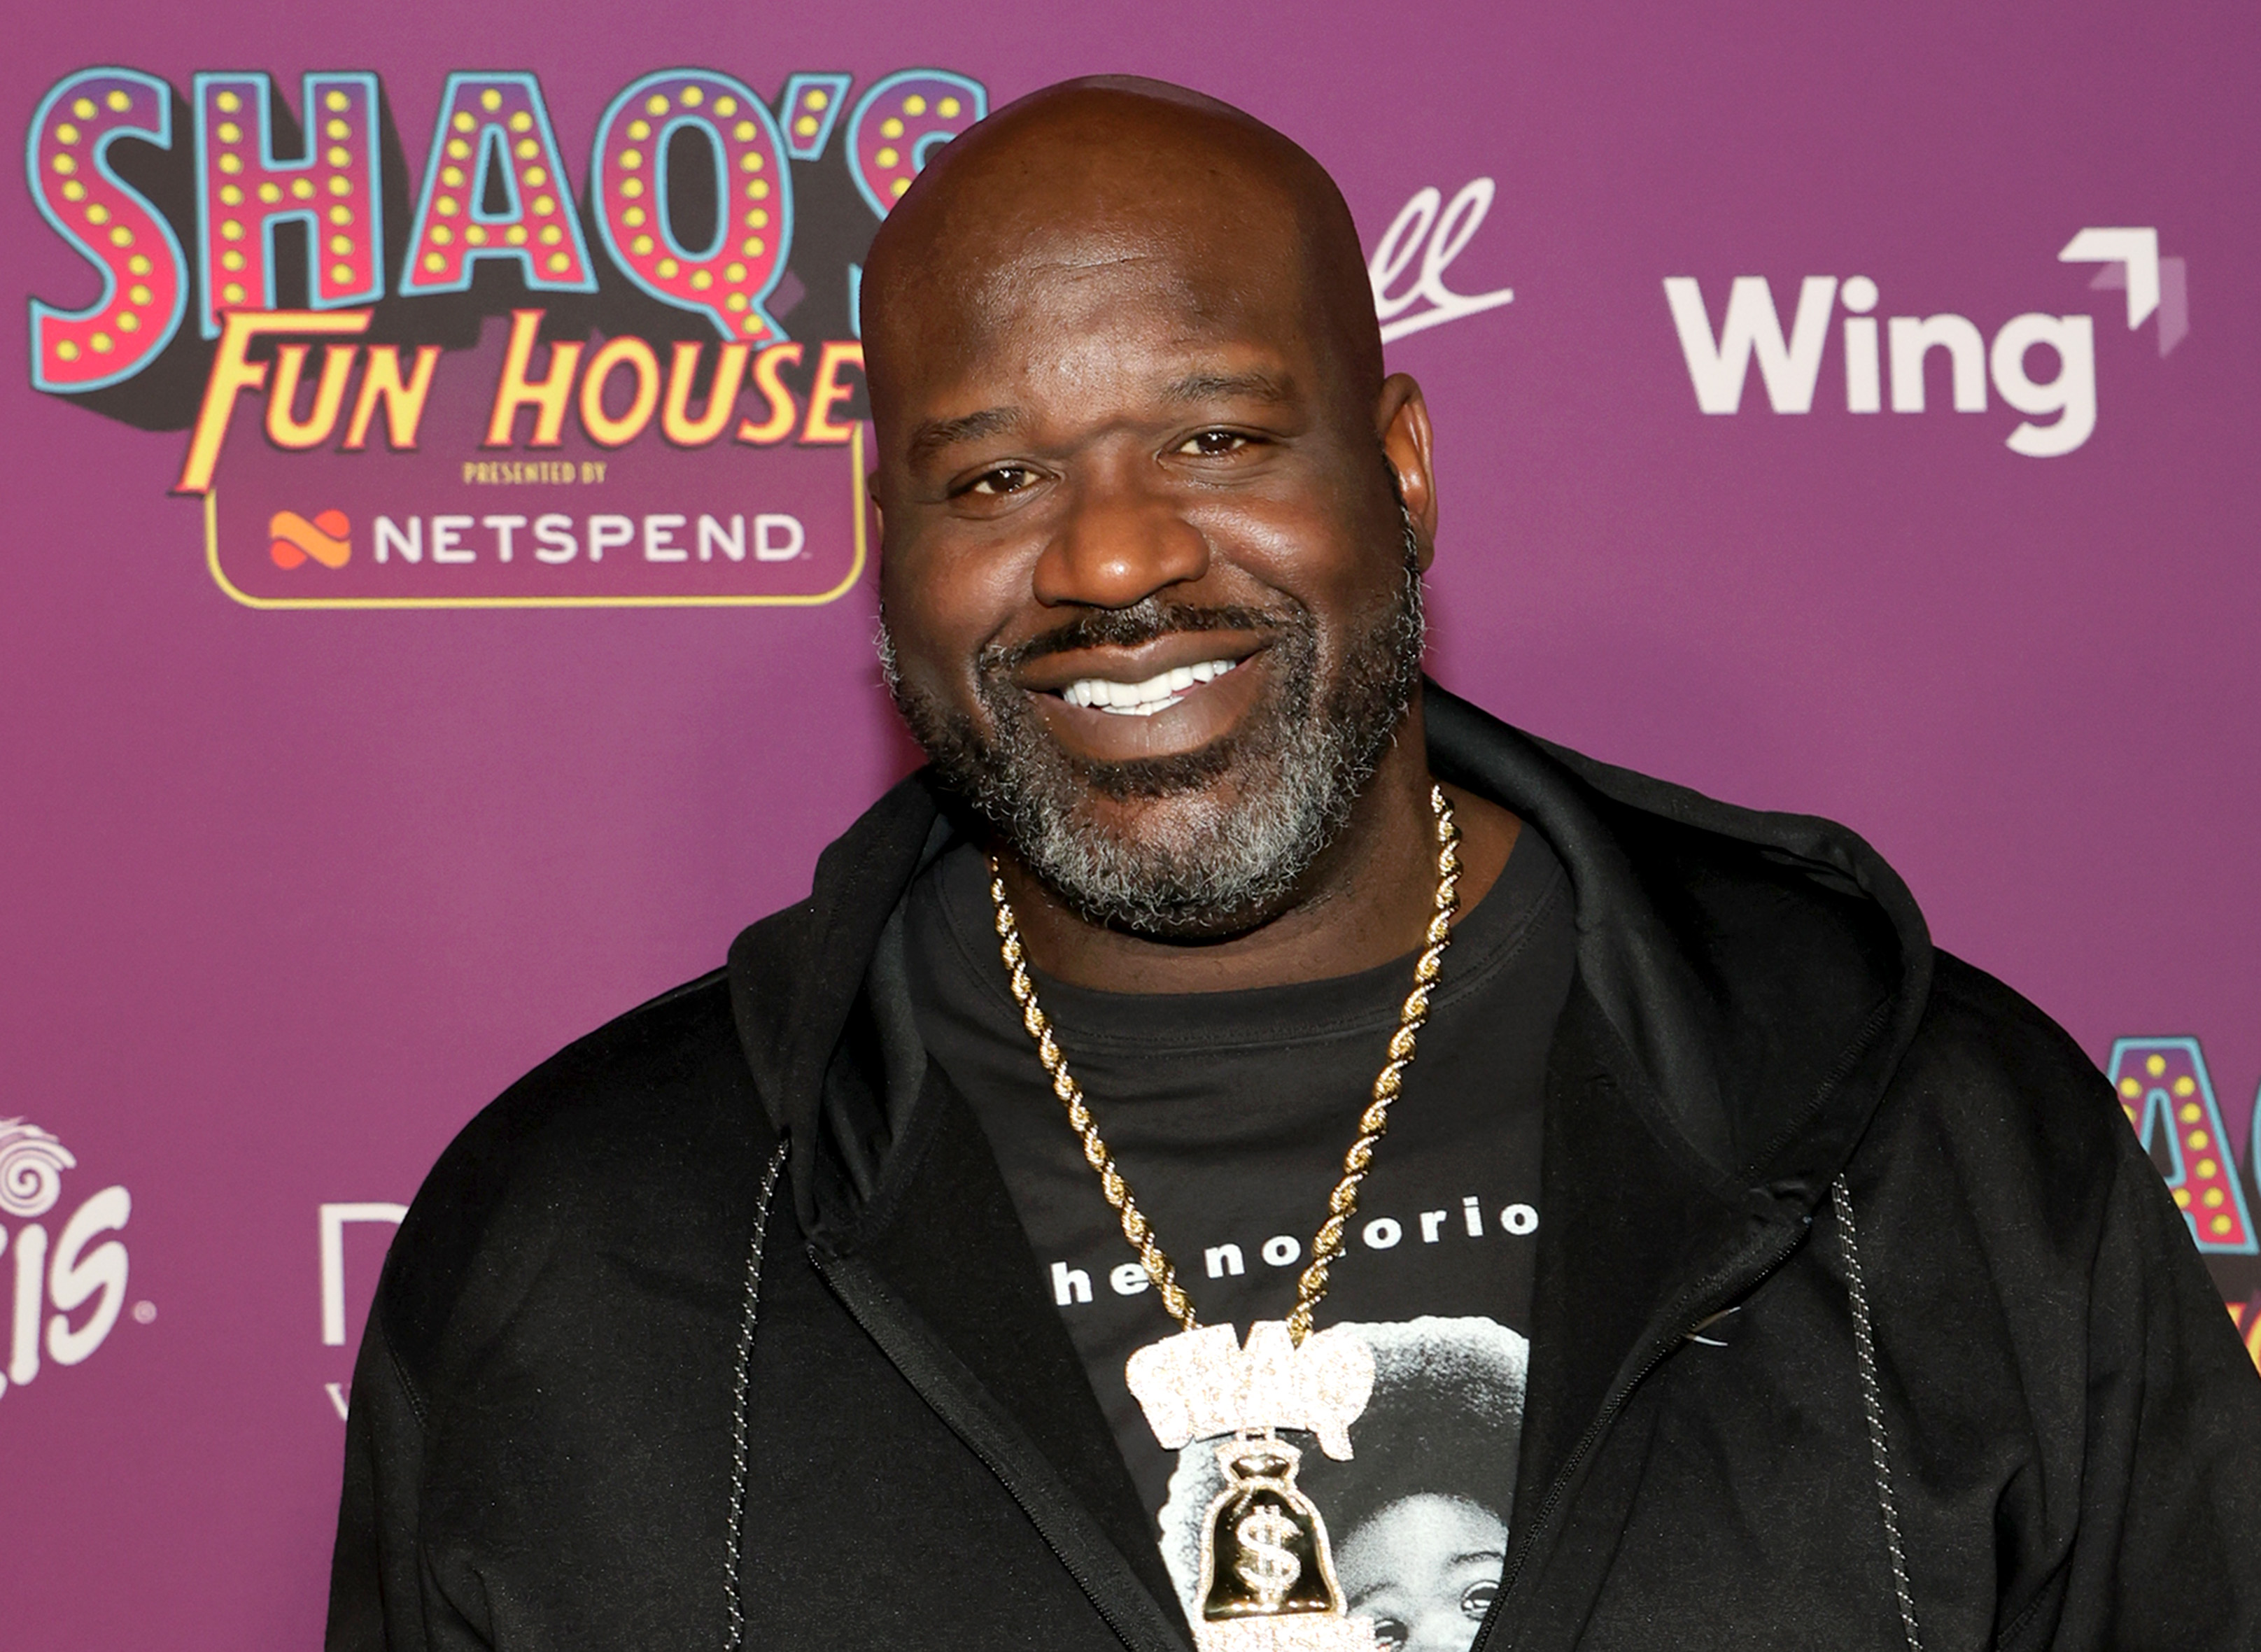 Shaquille O'Neal: Happy Birthday to Basketball's Most Dominant